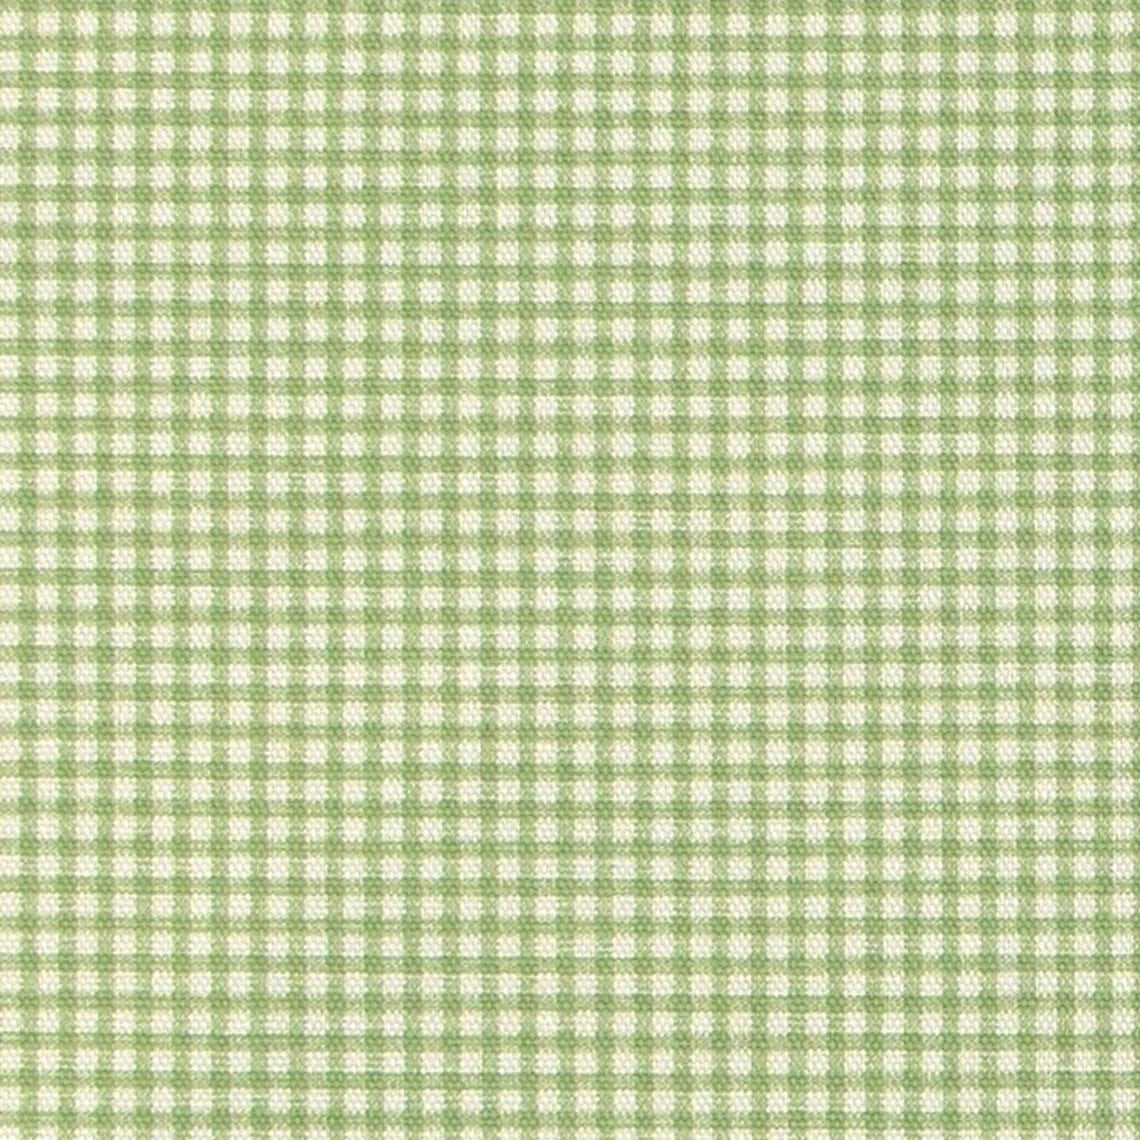 tie-up valance in farmhouse jungle green gingham check